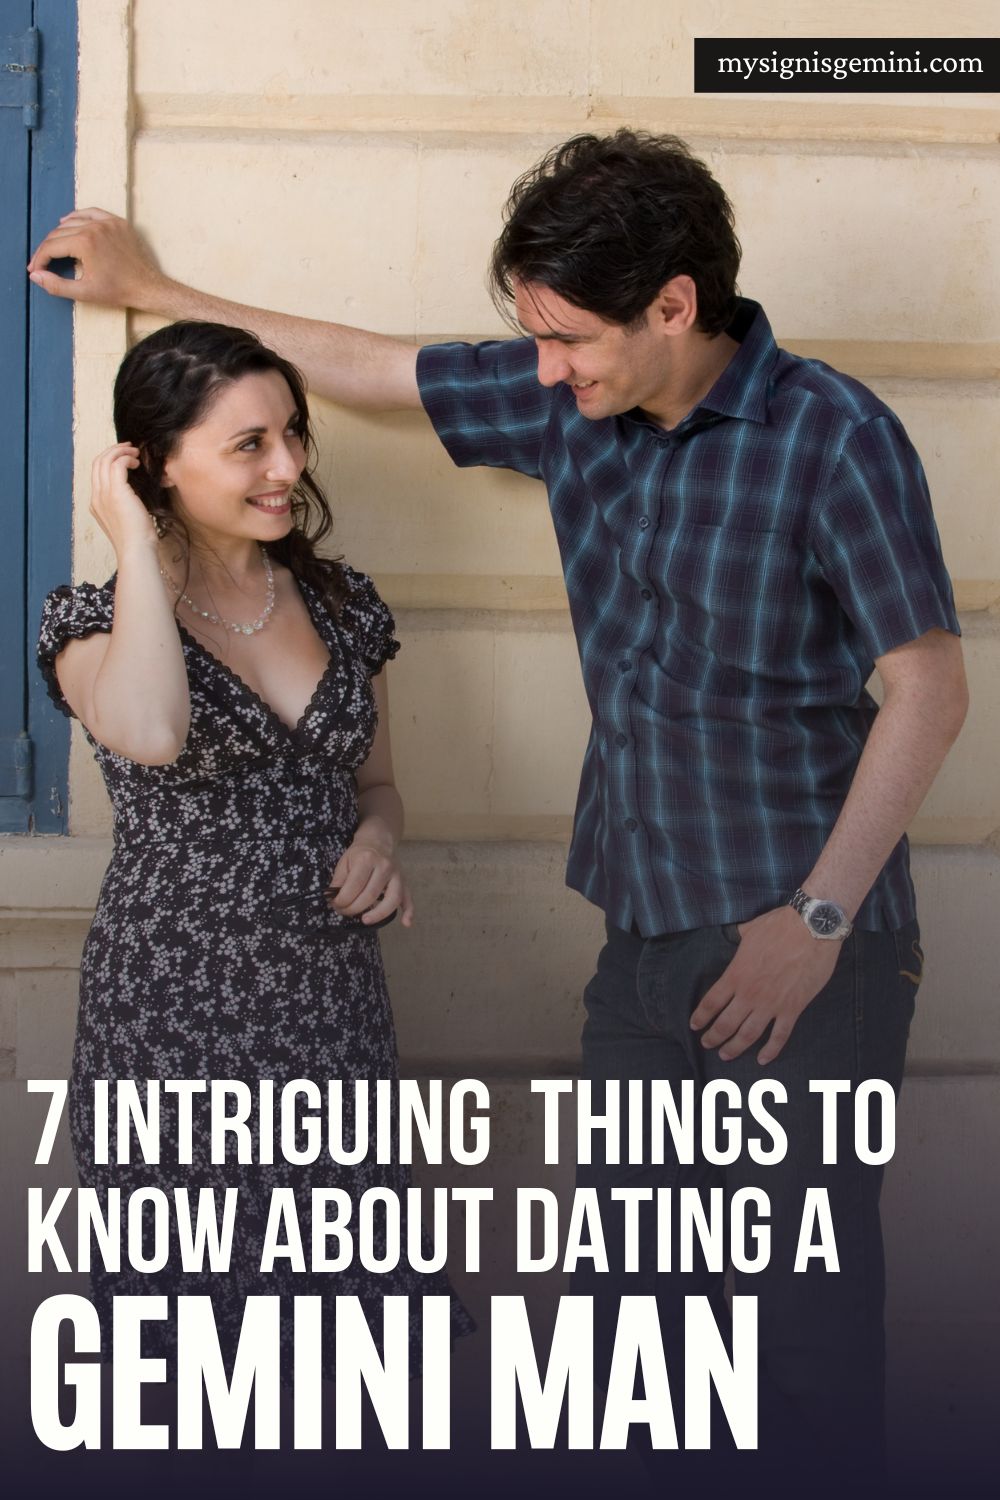 7 Intriguing Things To Know About Dating A Gemini Man